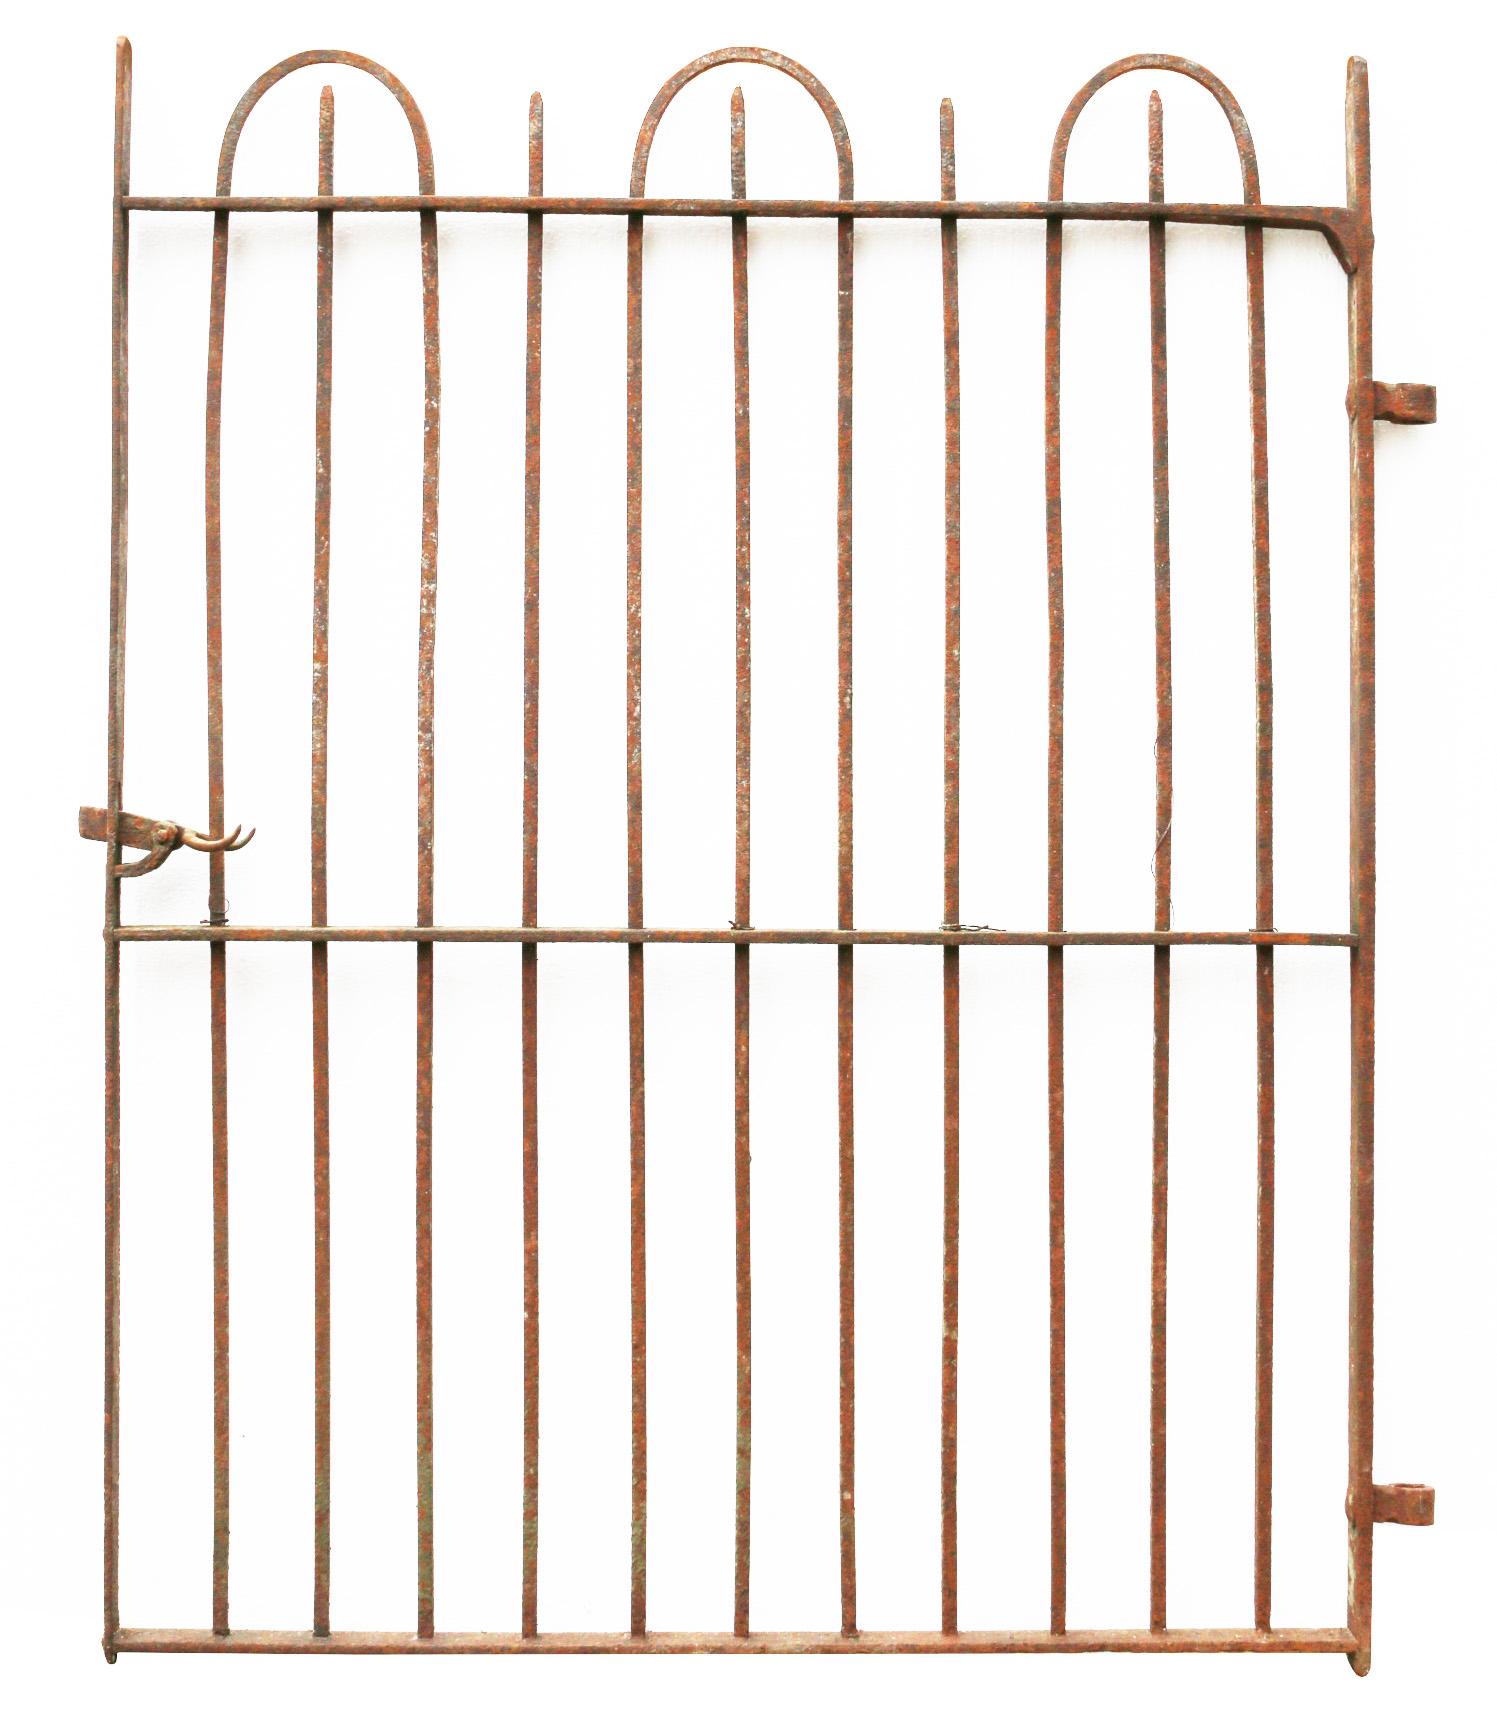 English 19th Century Wrought Iron Hooped Top Railings with Side Gate